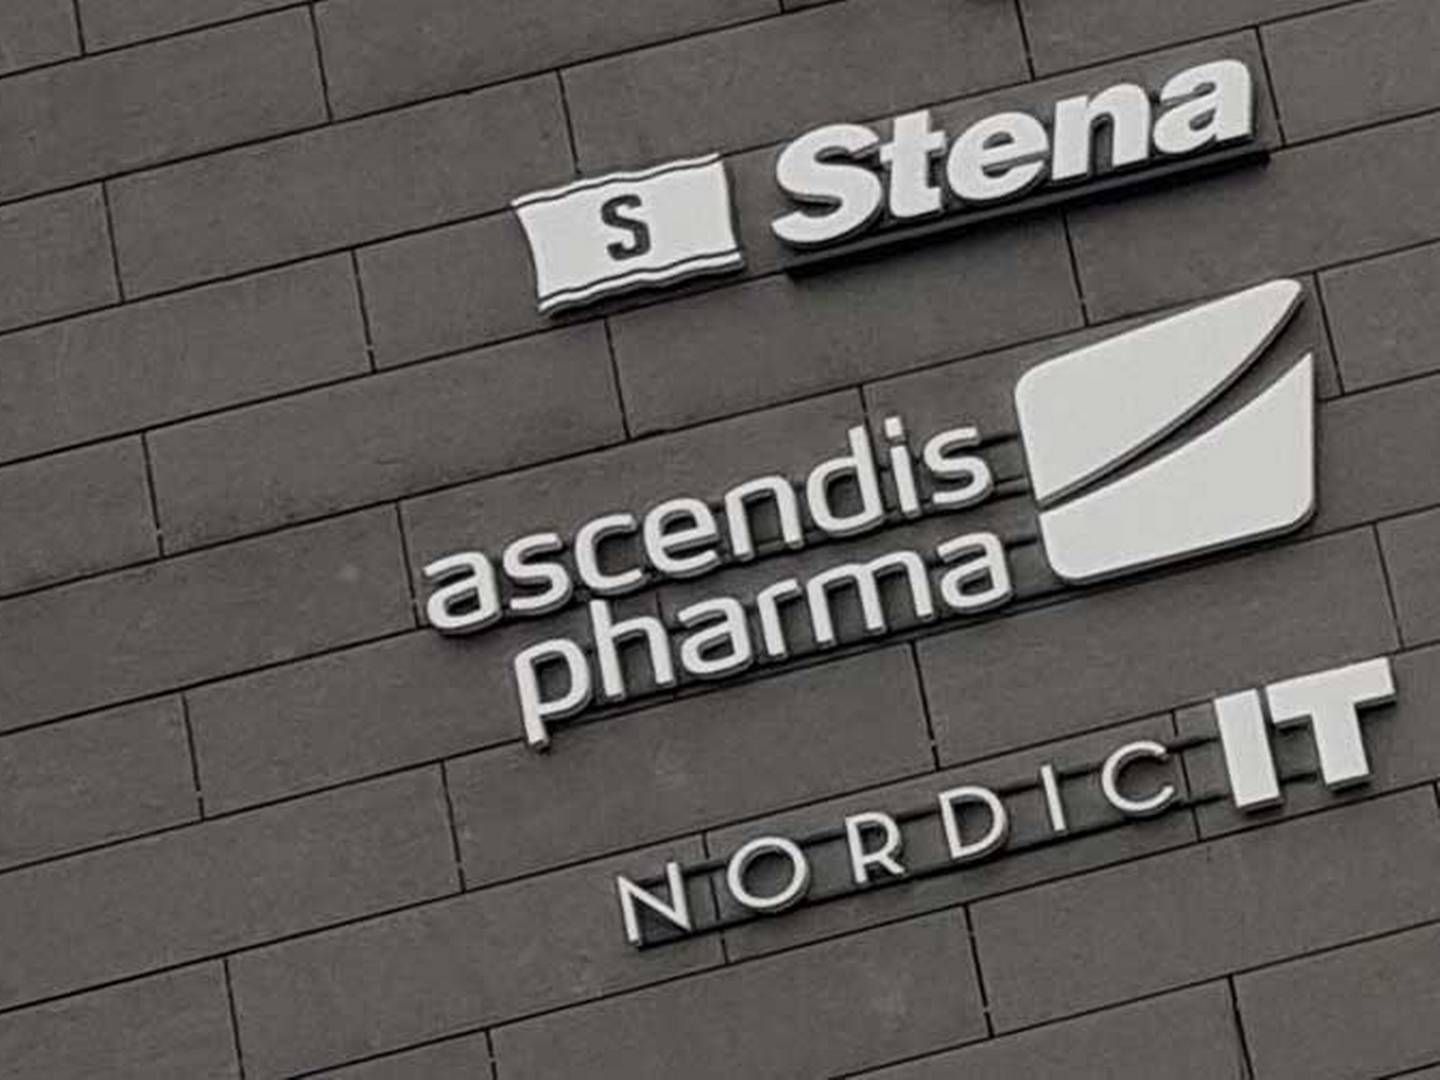 Ascendis Pharma does not have a full overview of the market potential for its drug Yorvipath in the UK, where it has just been approved. | Foto: Kevin Grønnemann / Medwatch